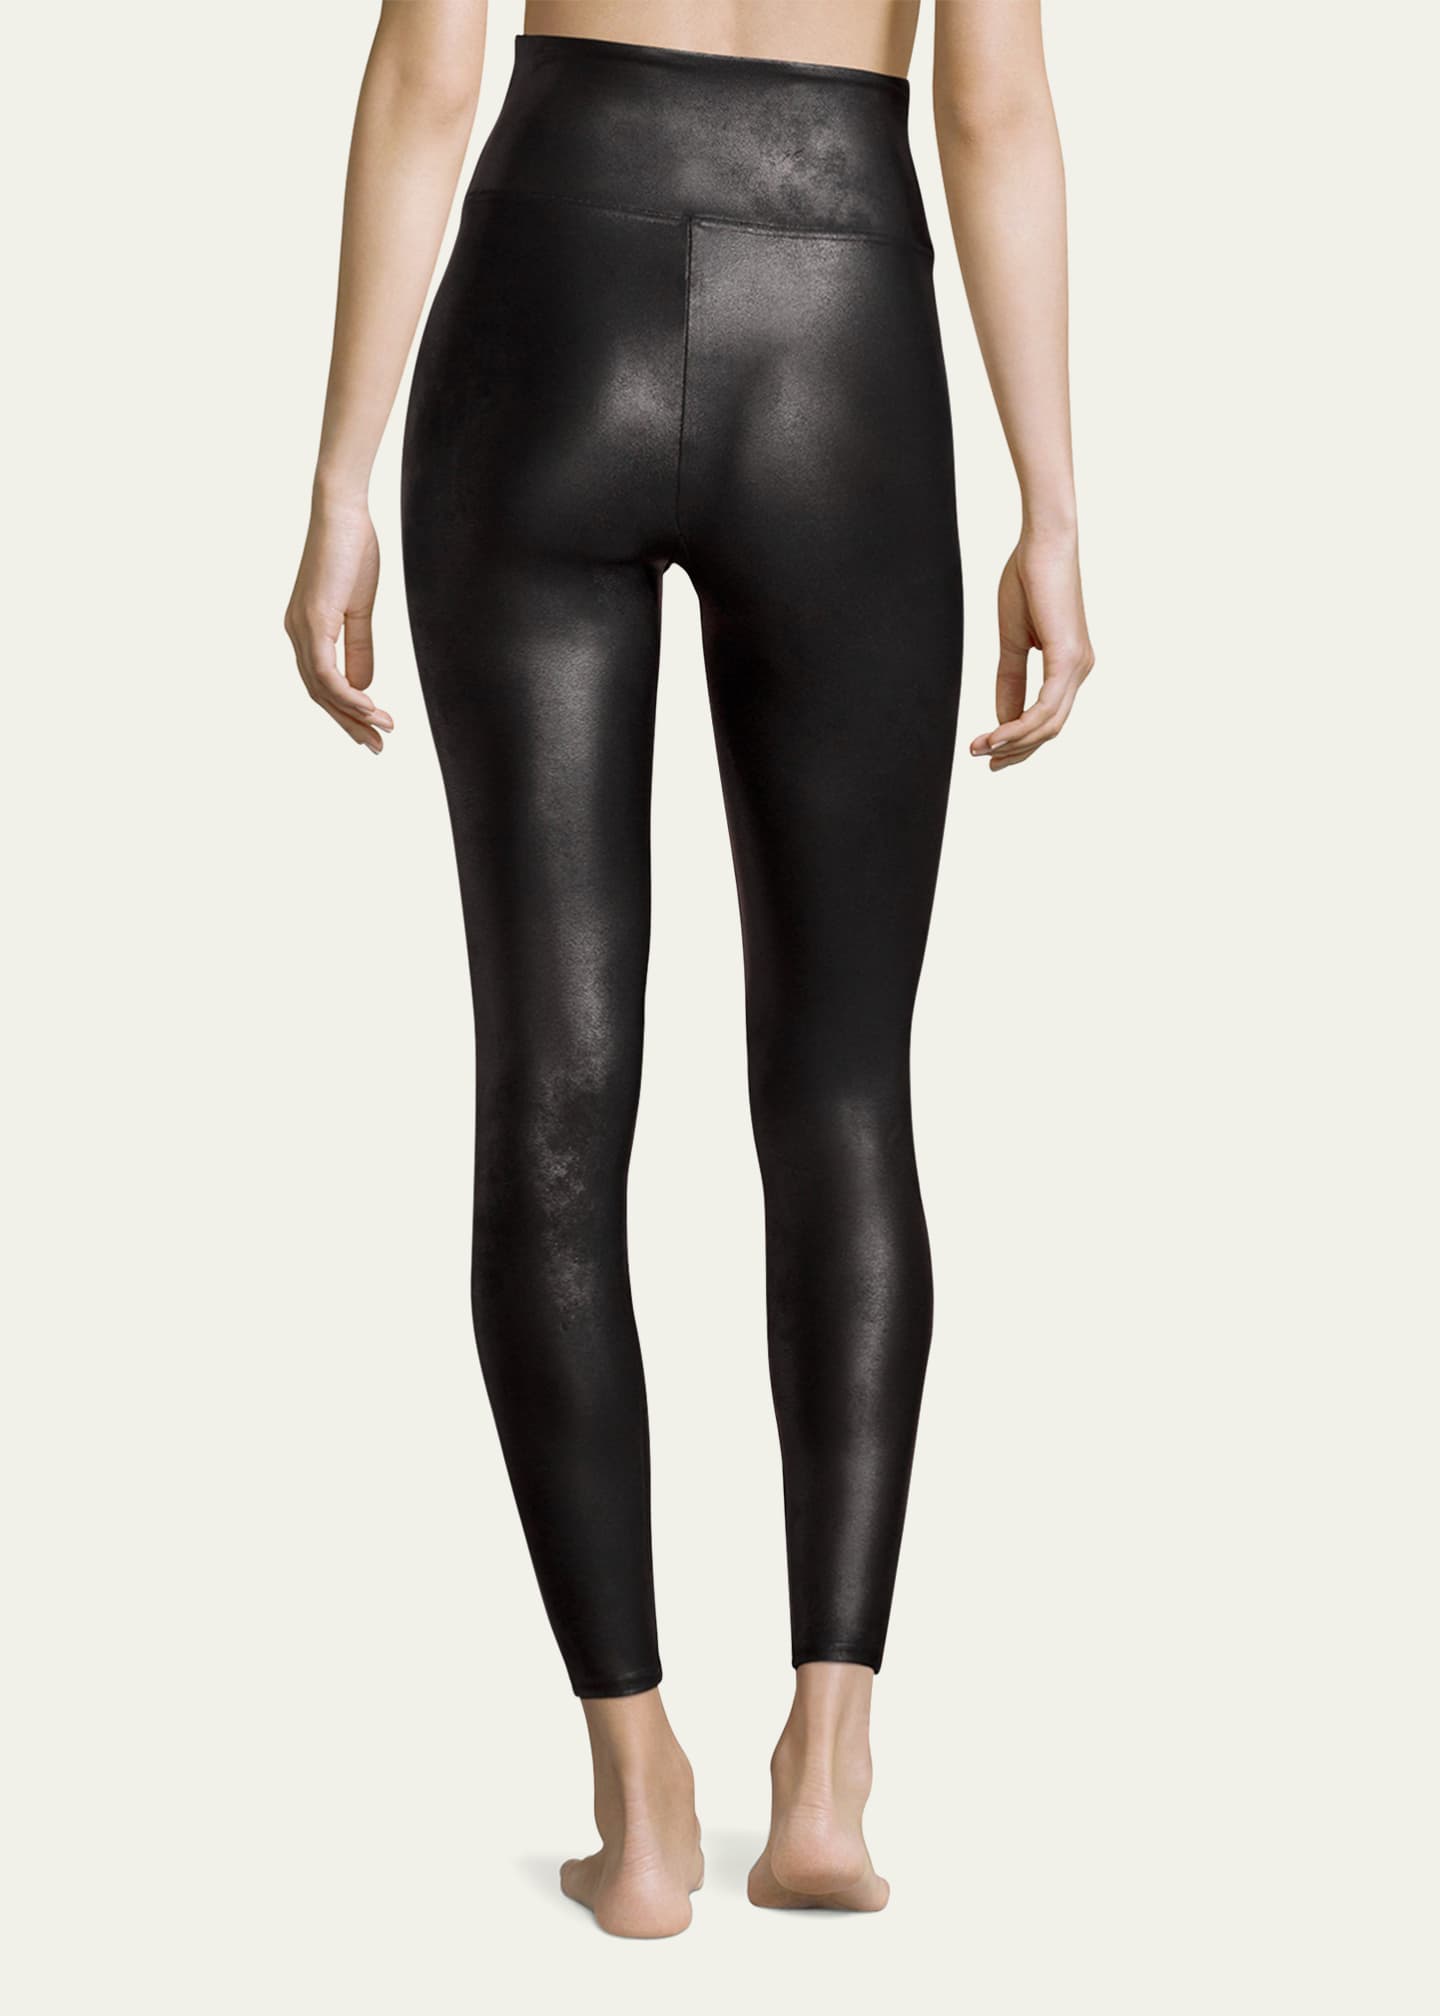 Spanx Faux Leather Legging in Black